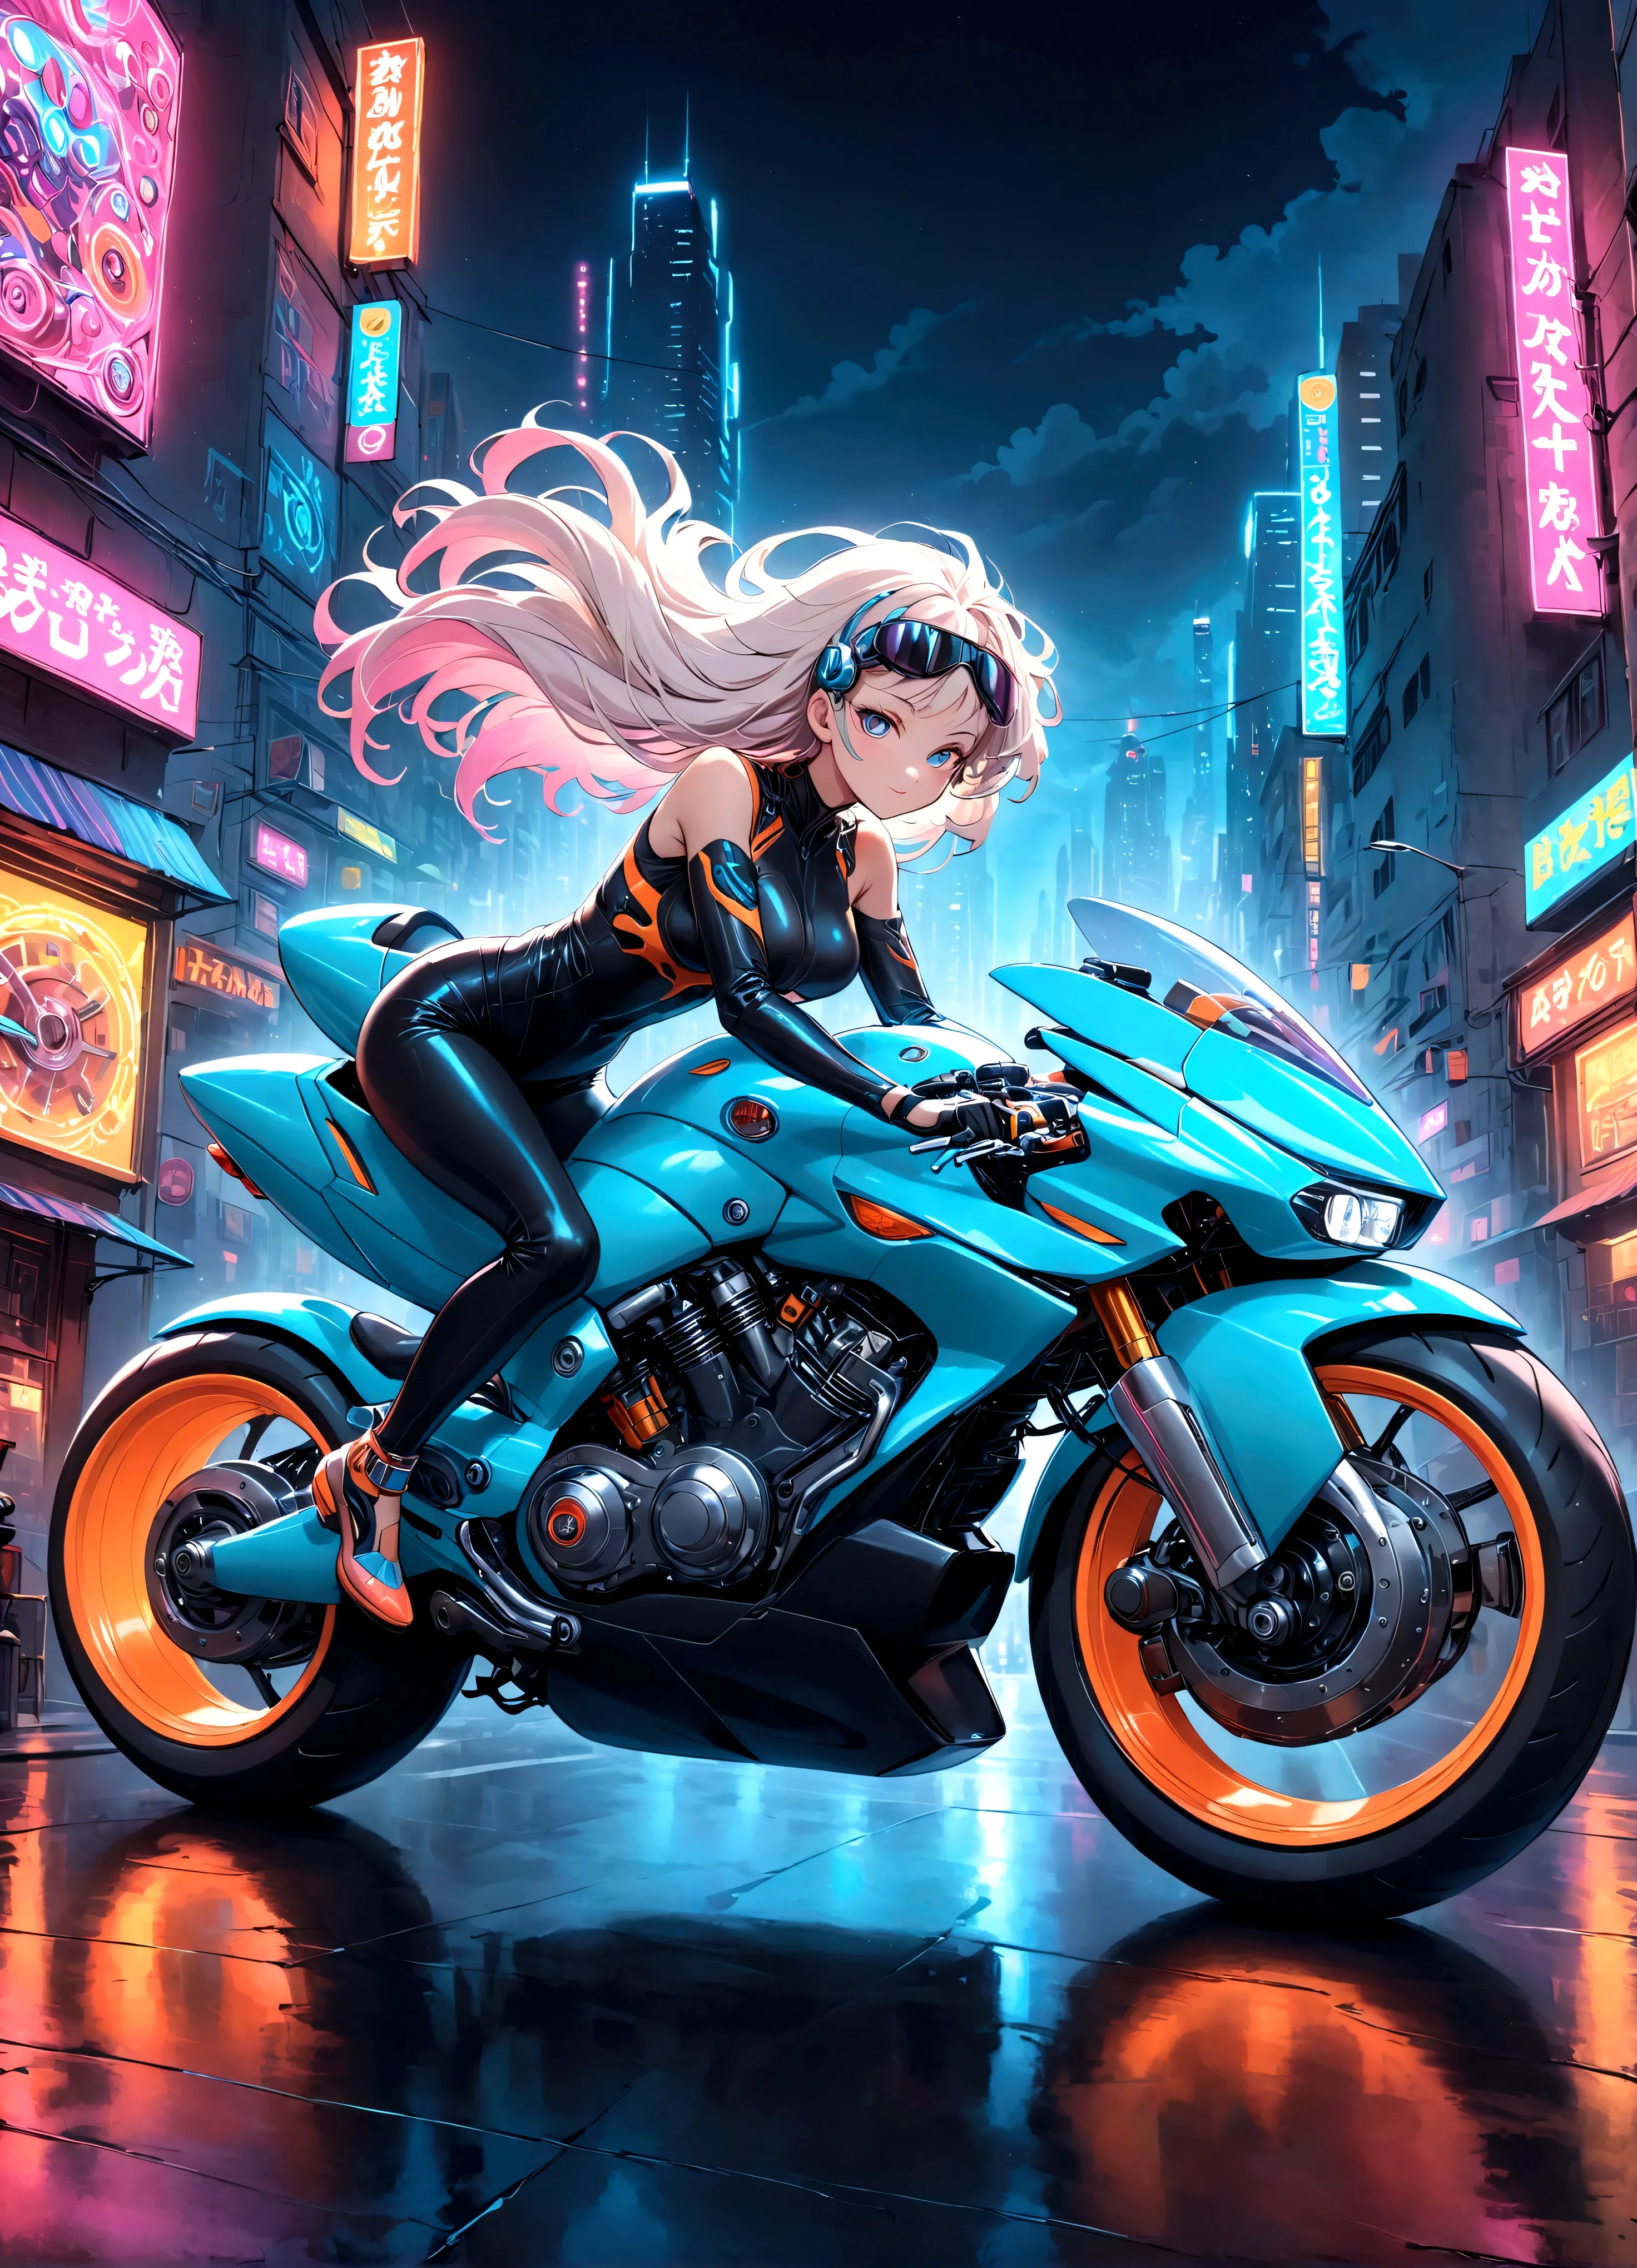 An intricately detailed and colorful motorcycle in the vibrant and imaginative style of Akira Toriyama. The motorcycle is futuri...